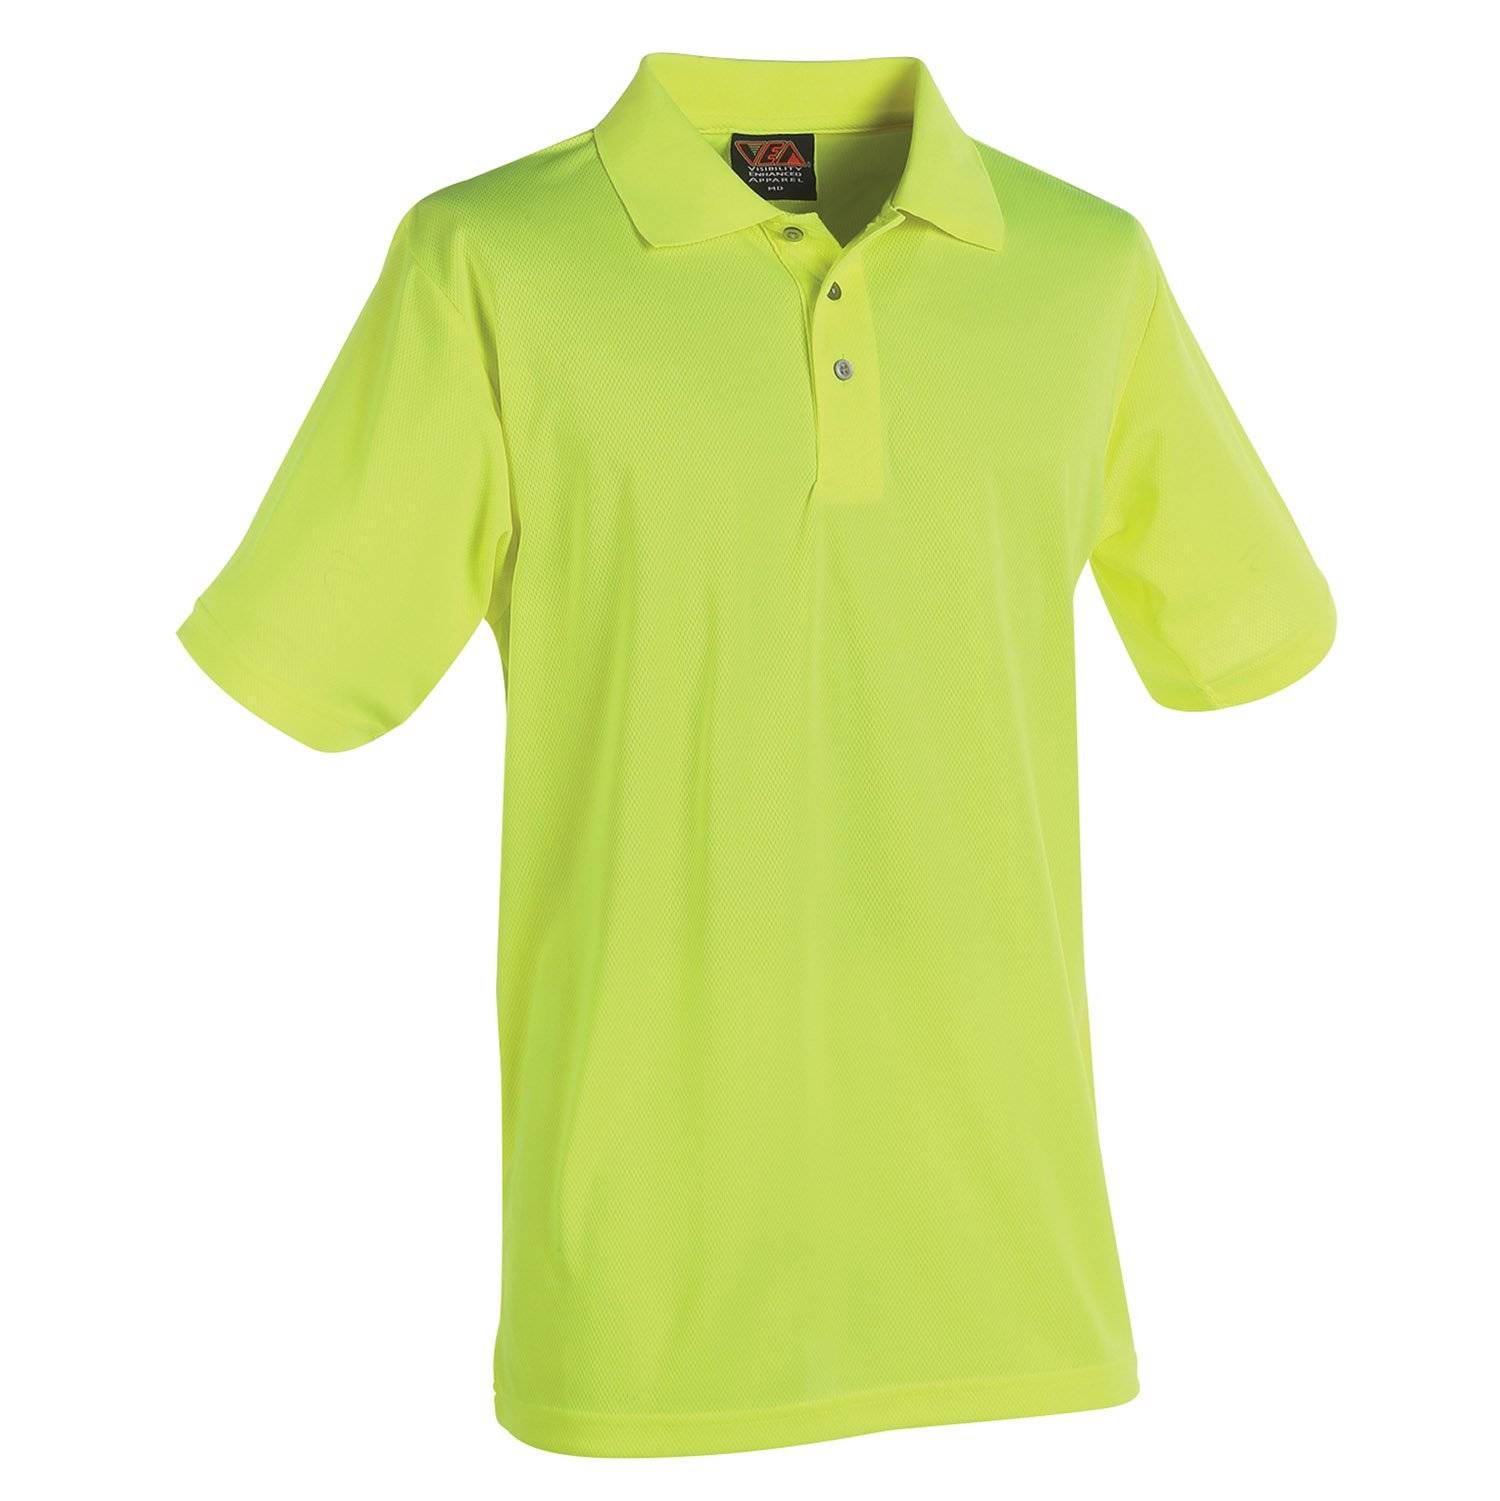 Reflective Apparel Factory Visibility Knit Performance Polo